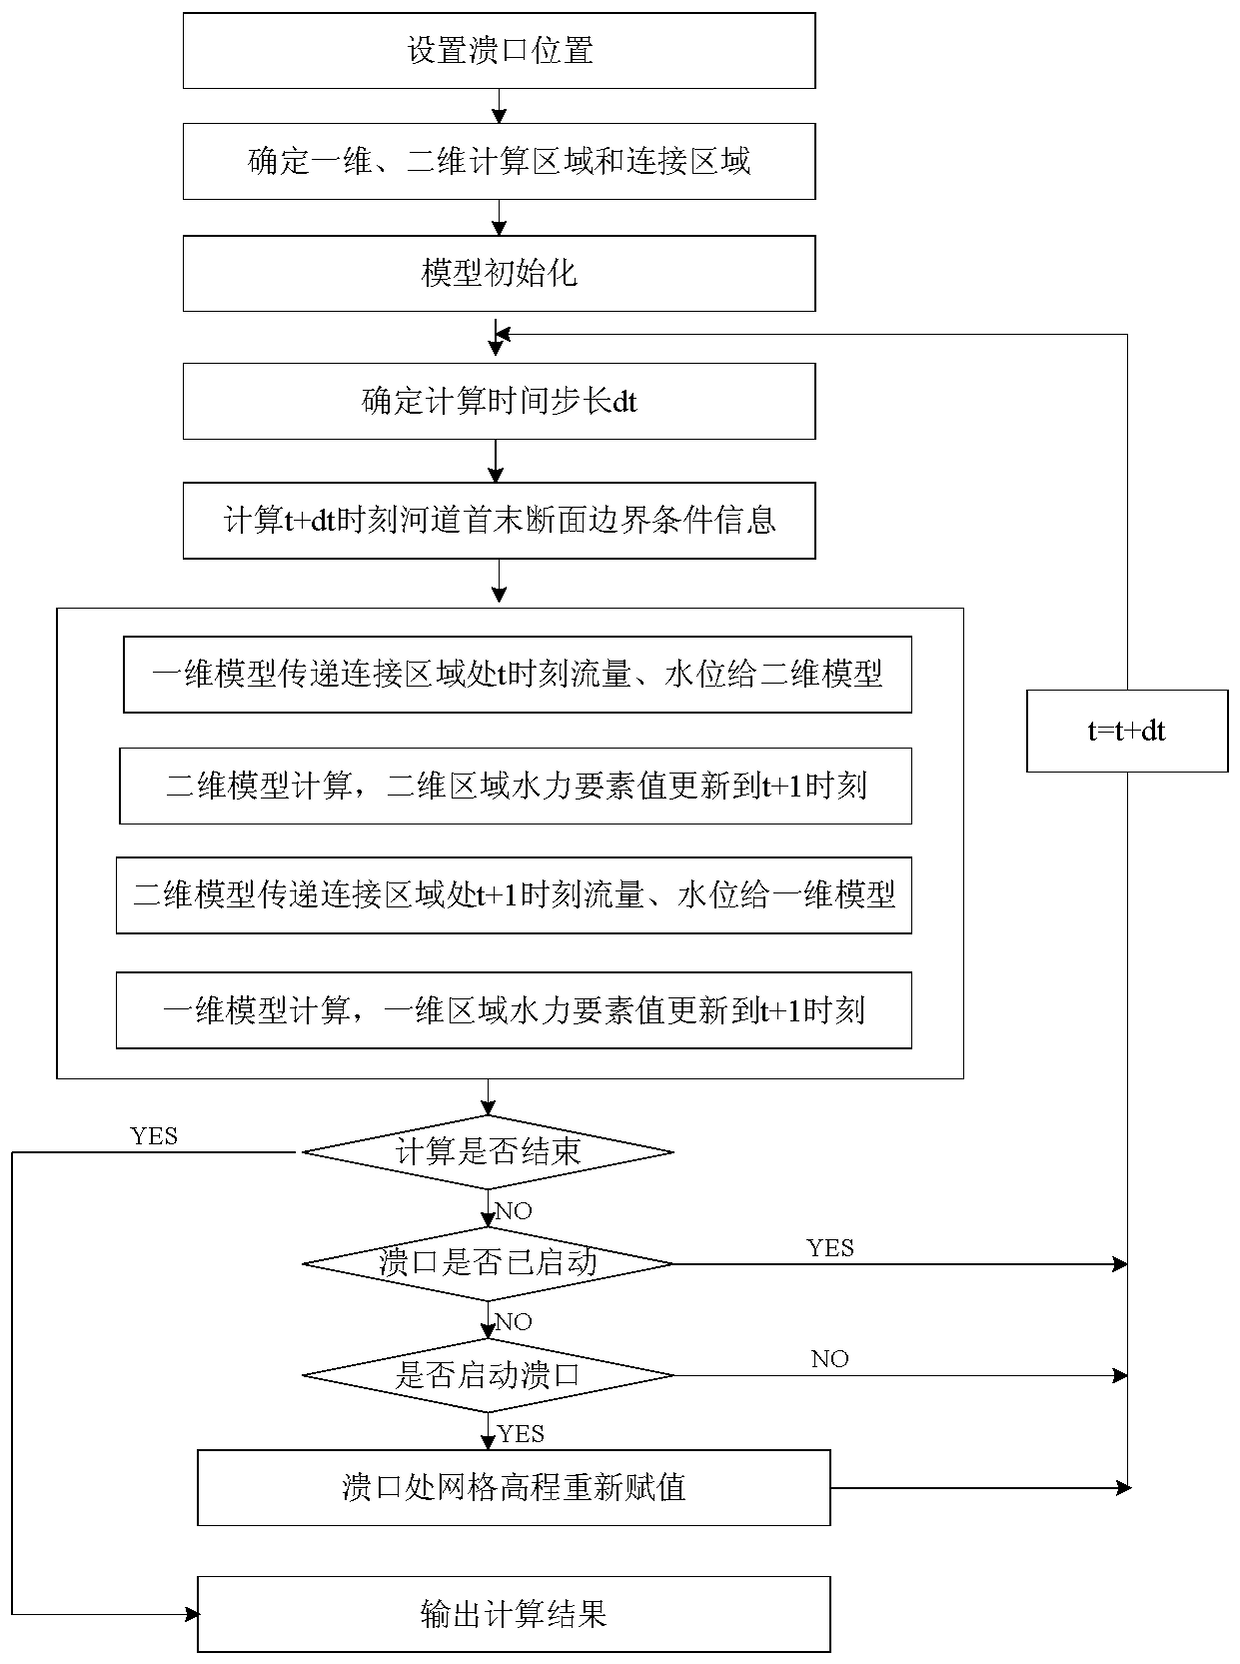 Coupling analysis method for one-dimensional mathematical model and two-dimensional mathematical model of river way outburst flood